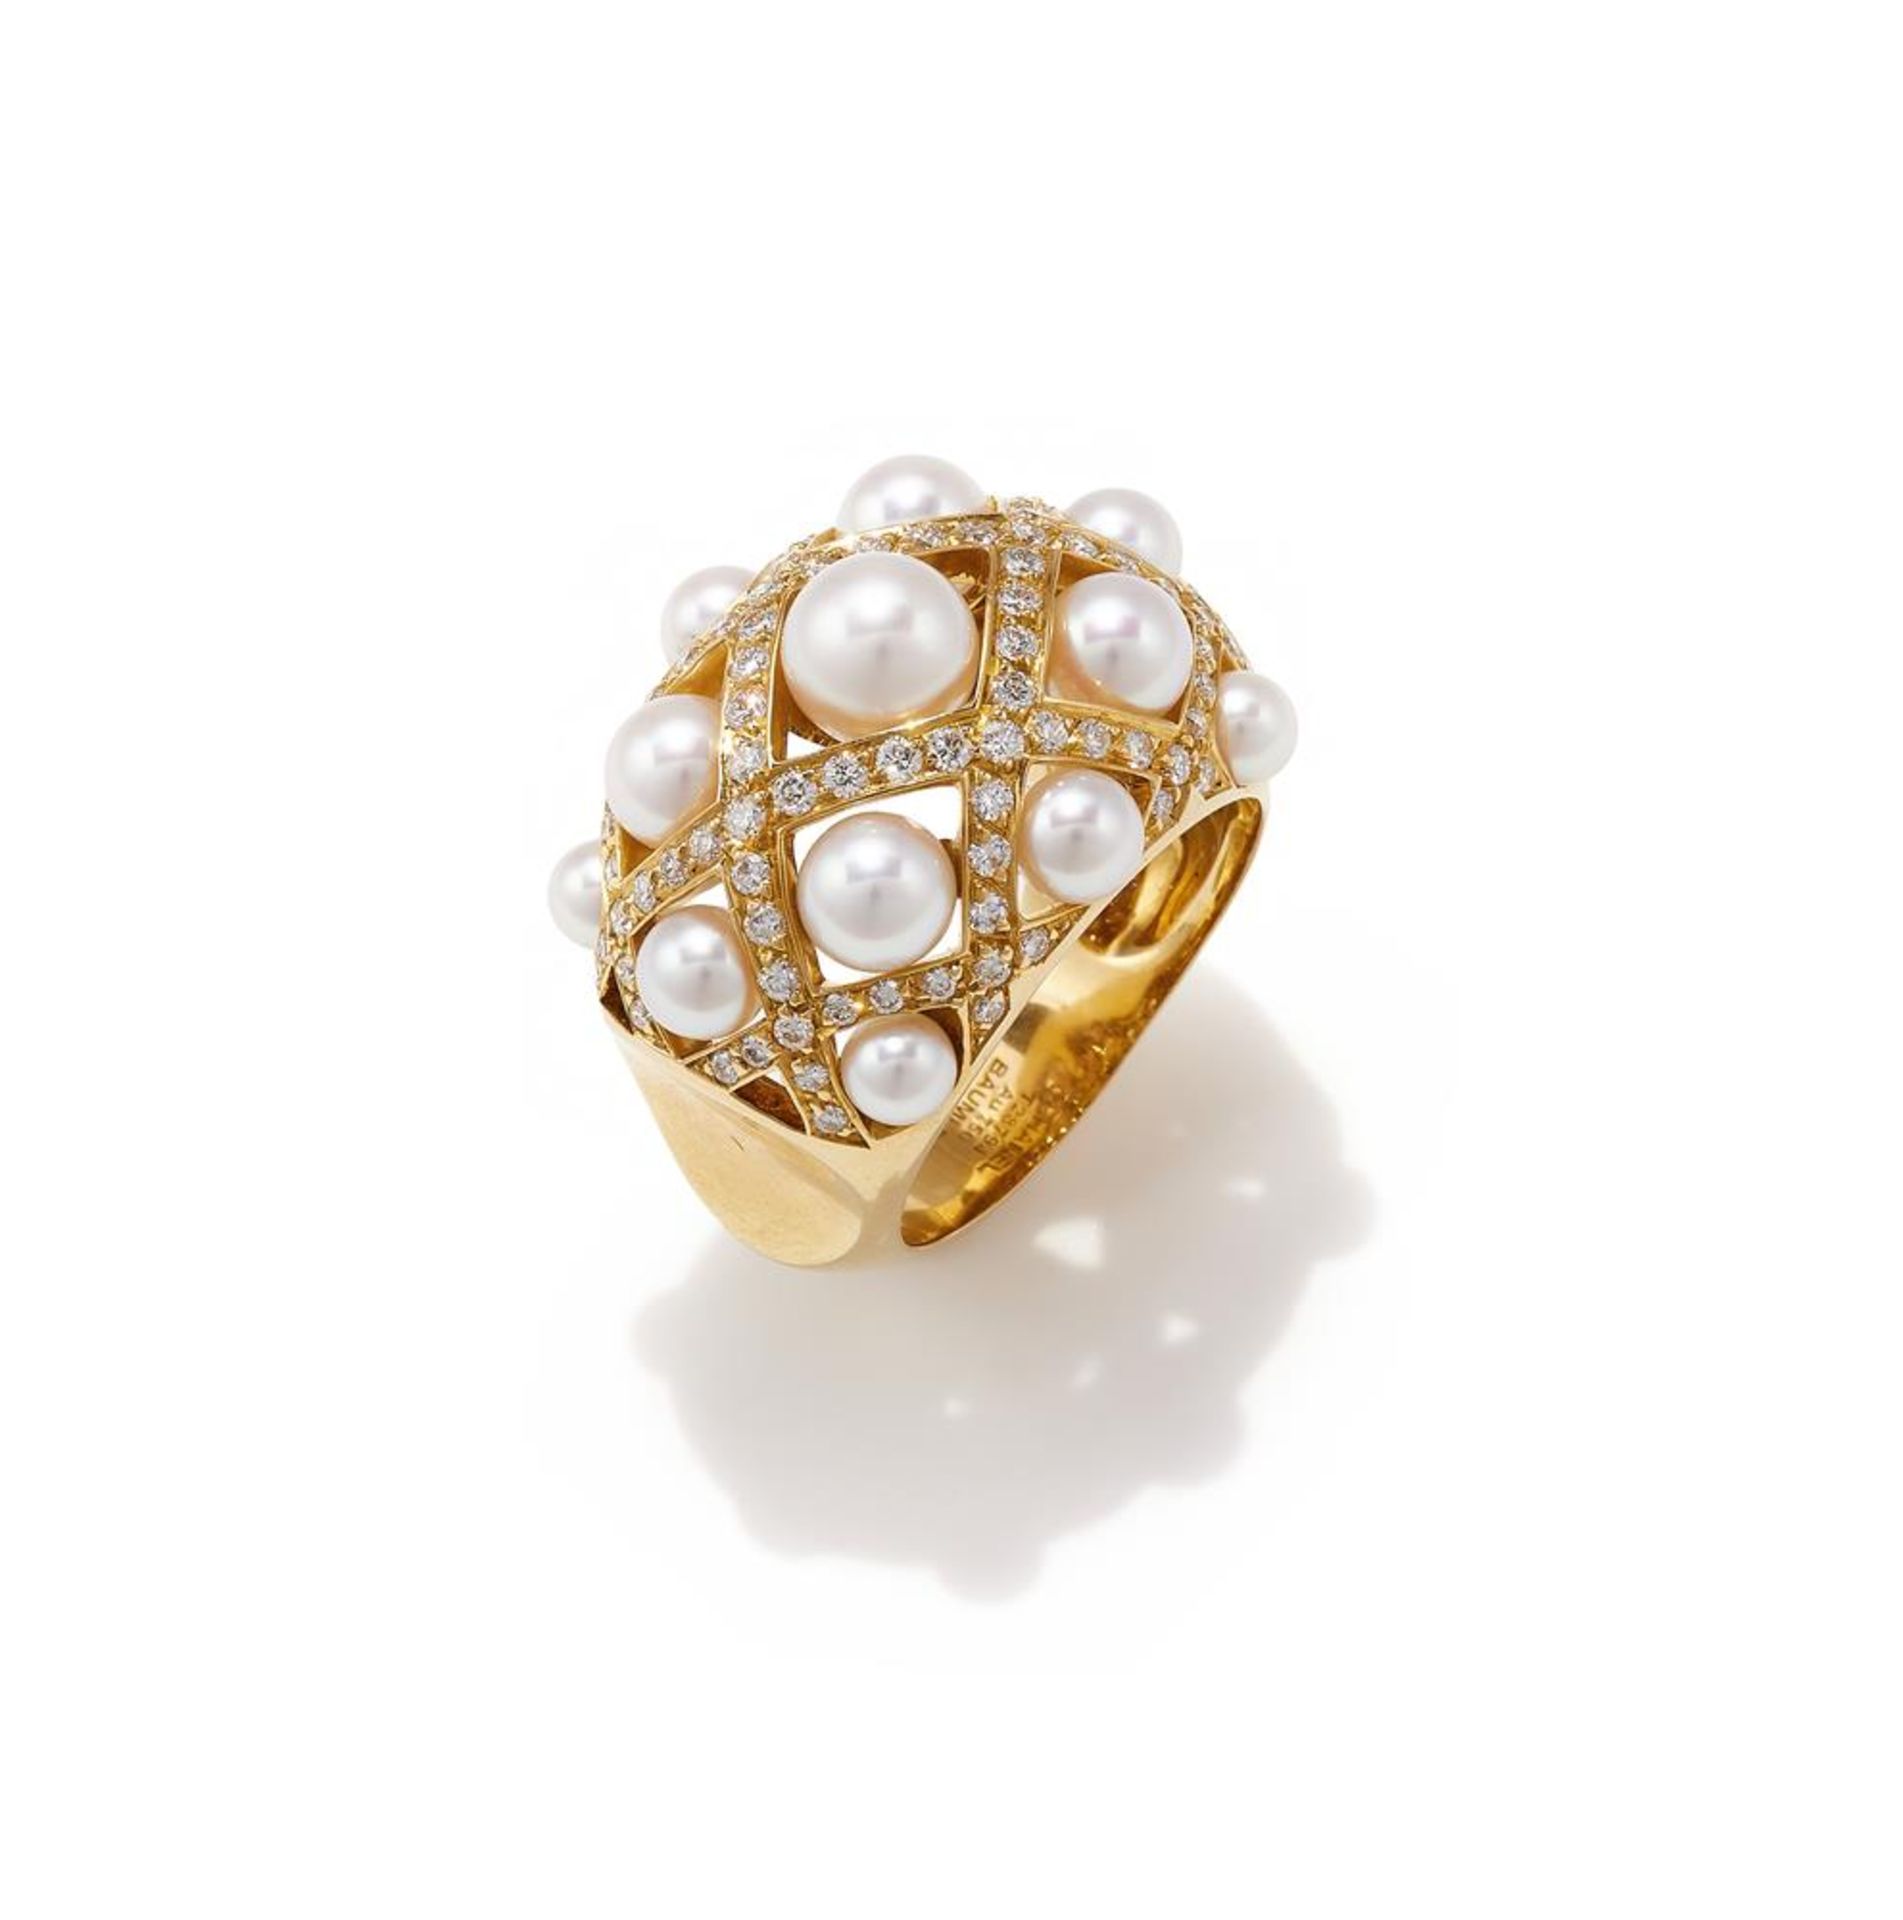 LORENZ BAUMER FOR CHANEL, A DIAMOND AND CULTURED PEARL 'PERLES MATELASSE' RING